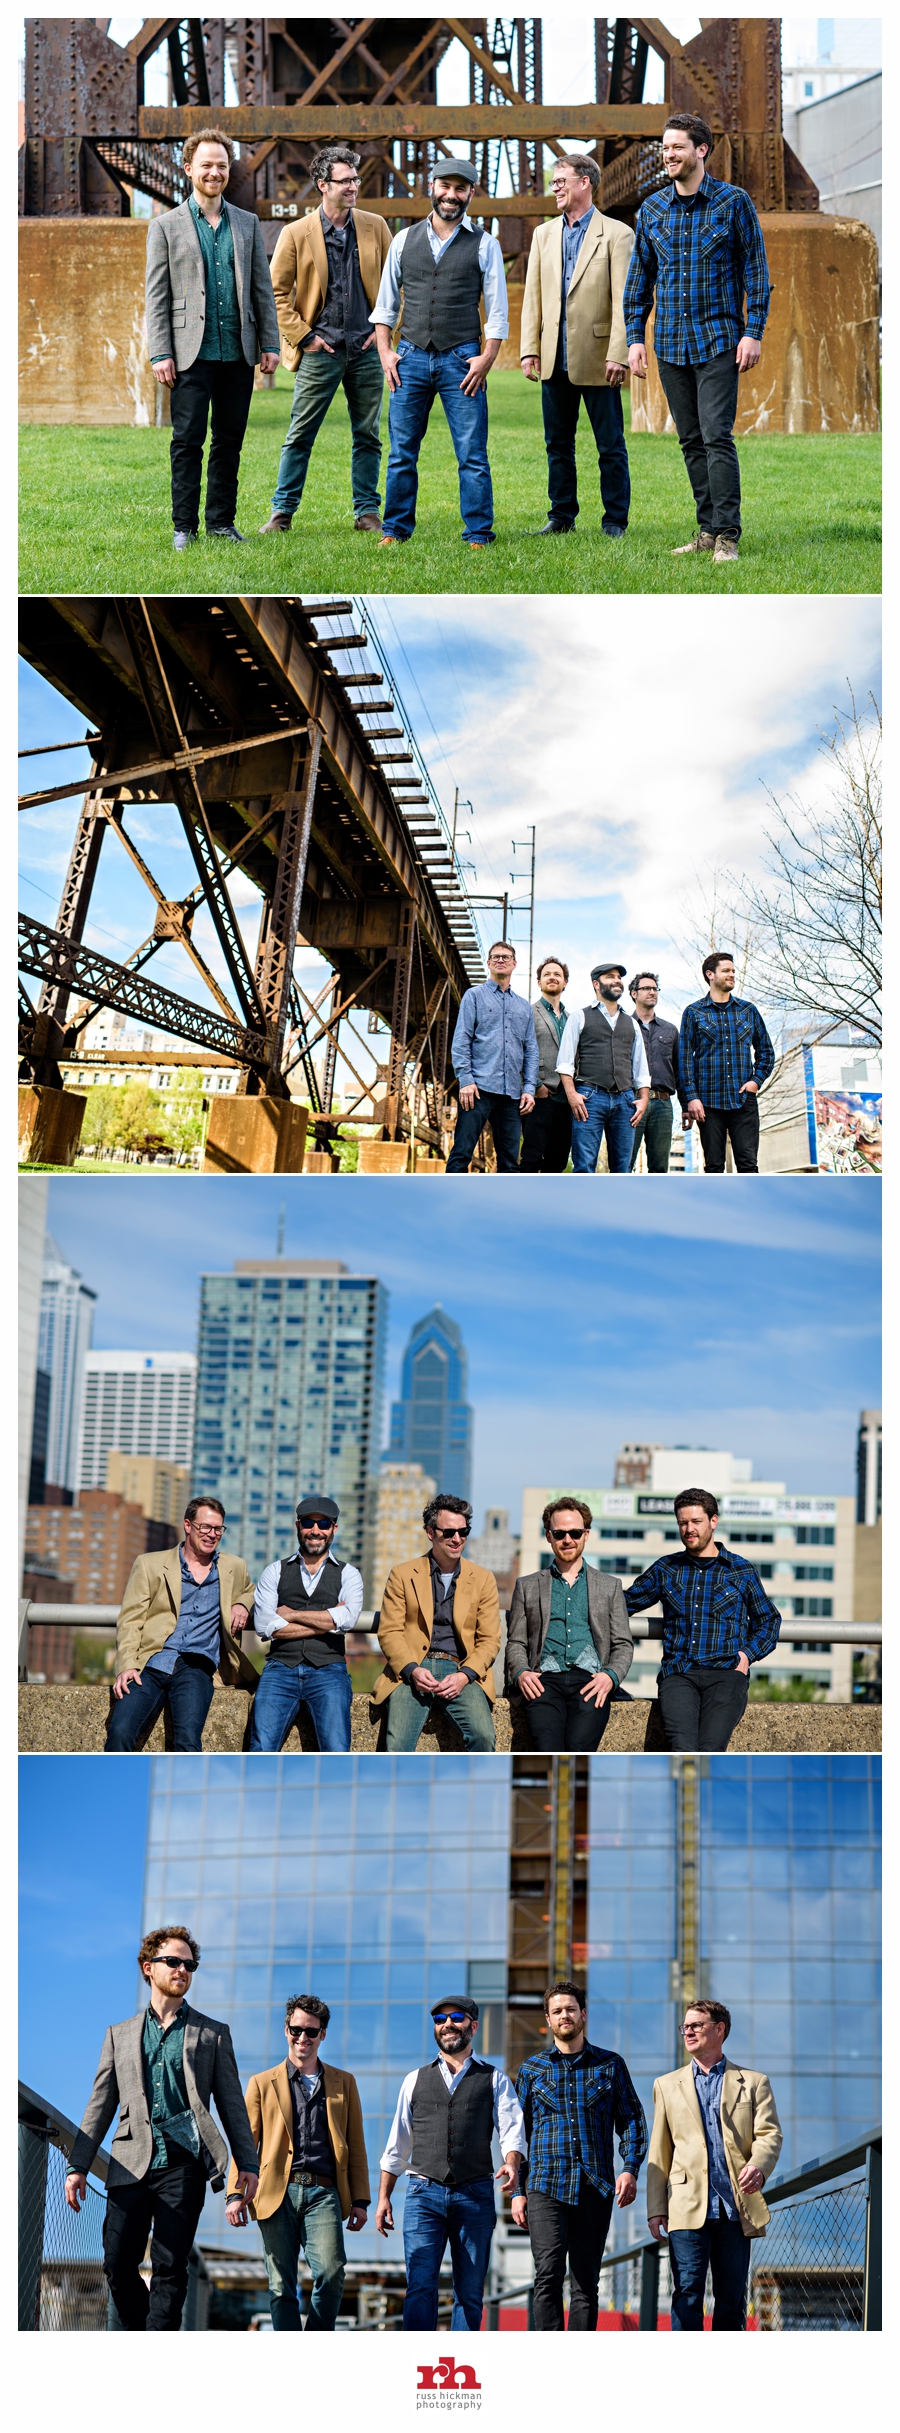 A Bluegrass Band pose with the Philadelphia skyline in the background.